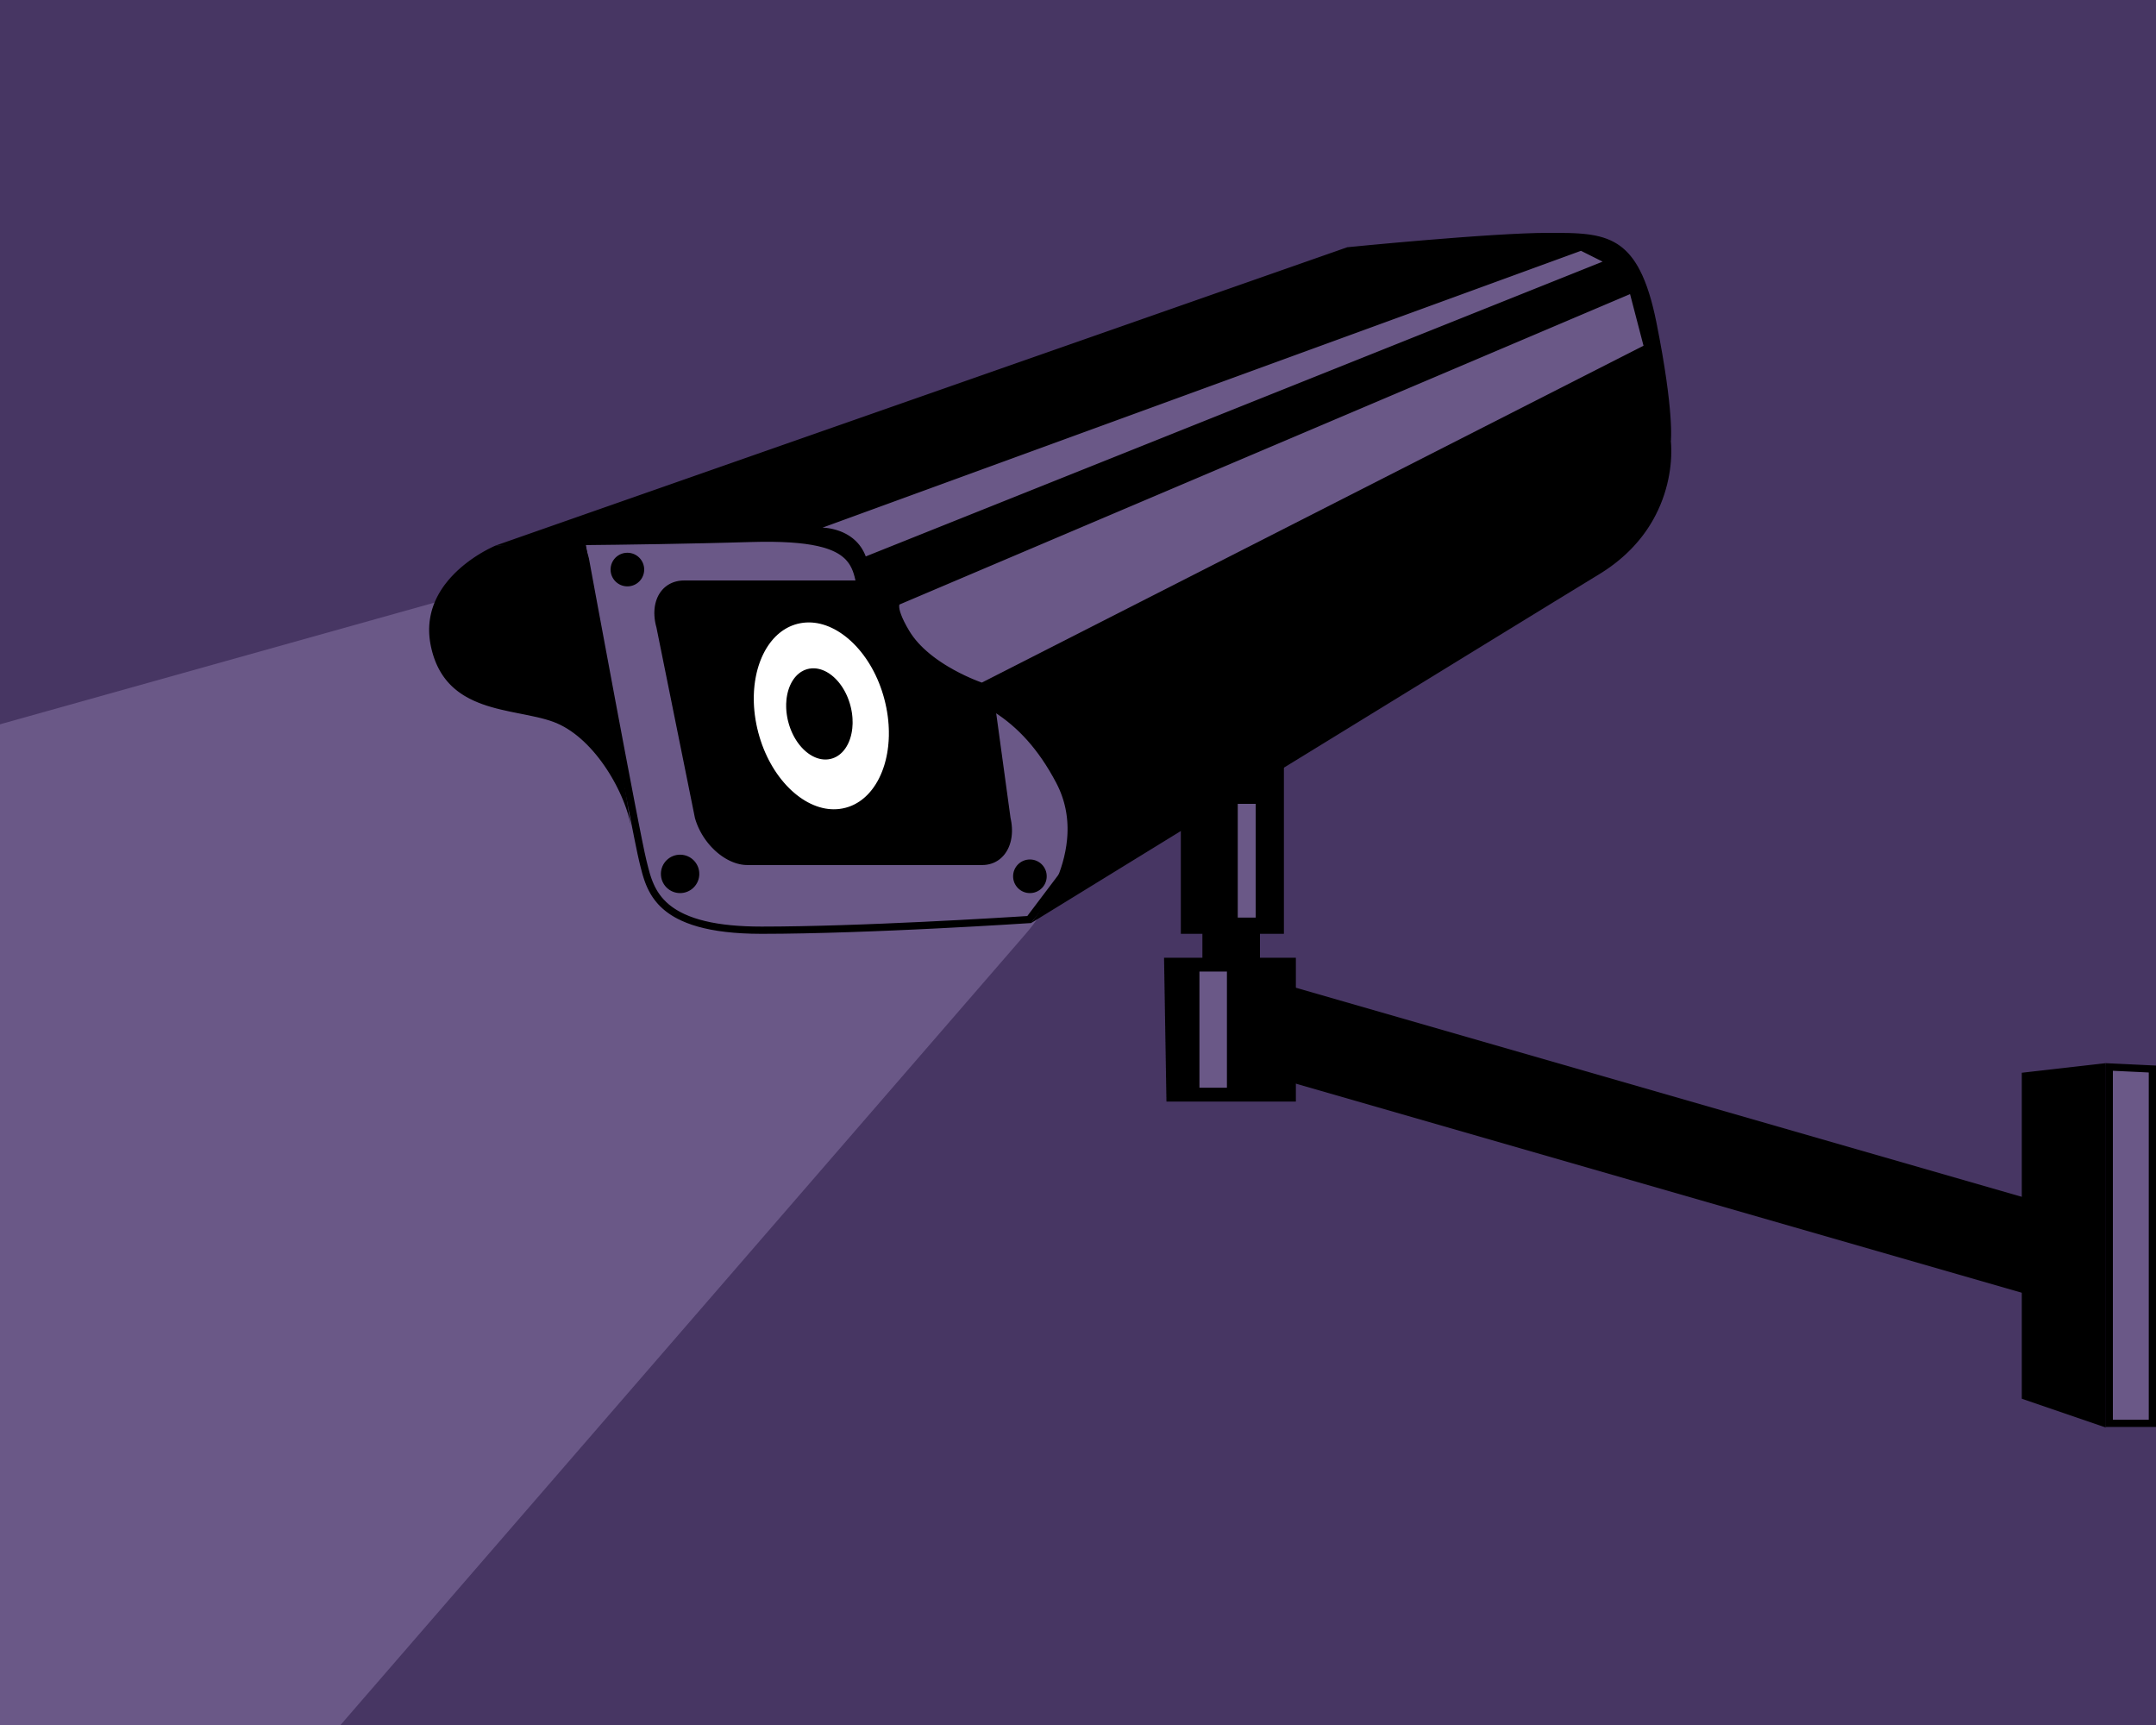 New computer game trains you to spy on citizens – just like the government